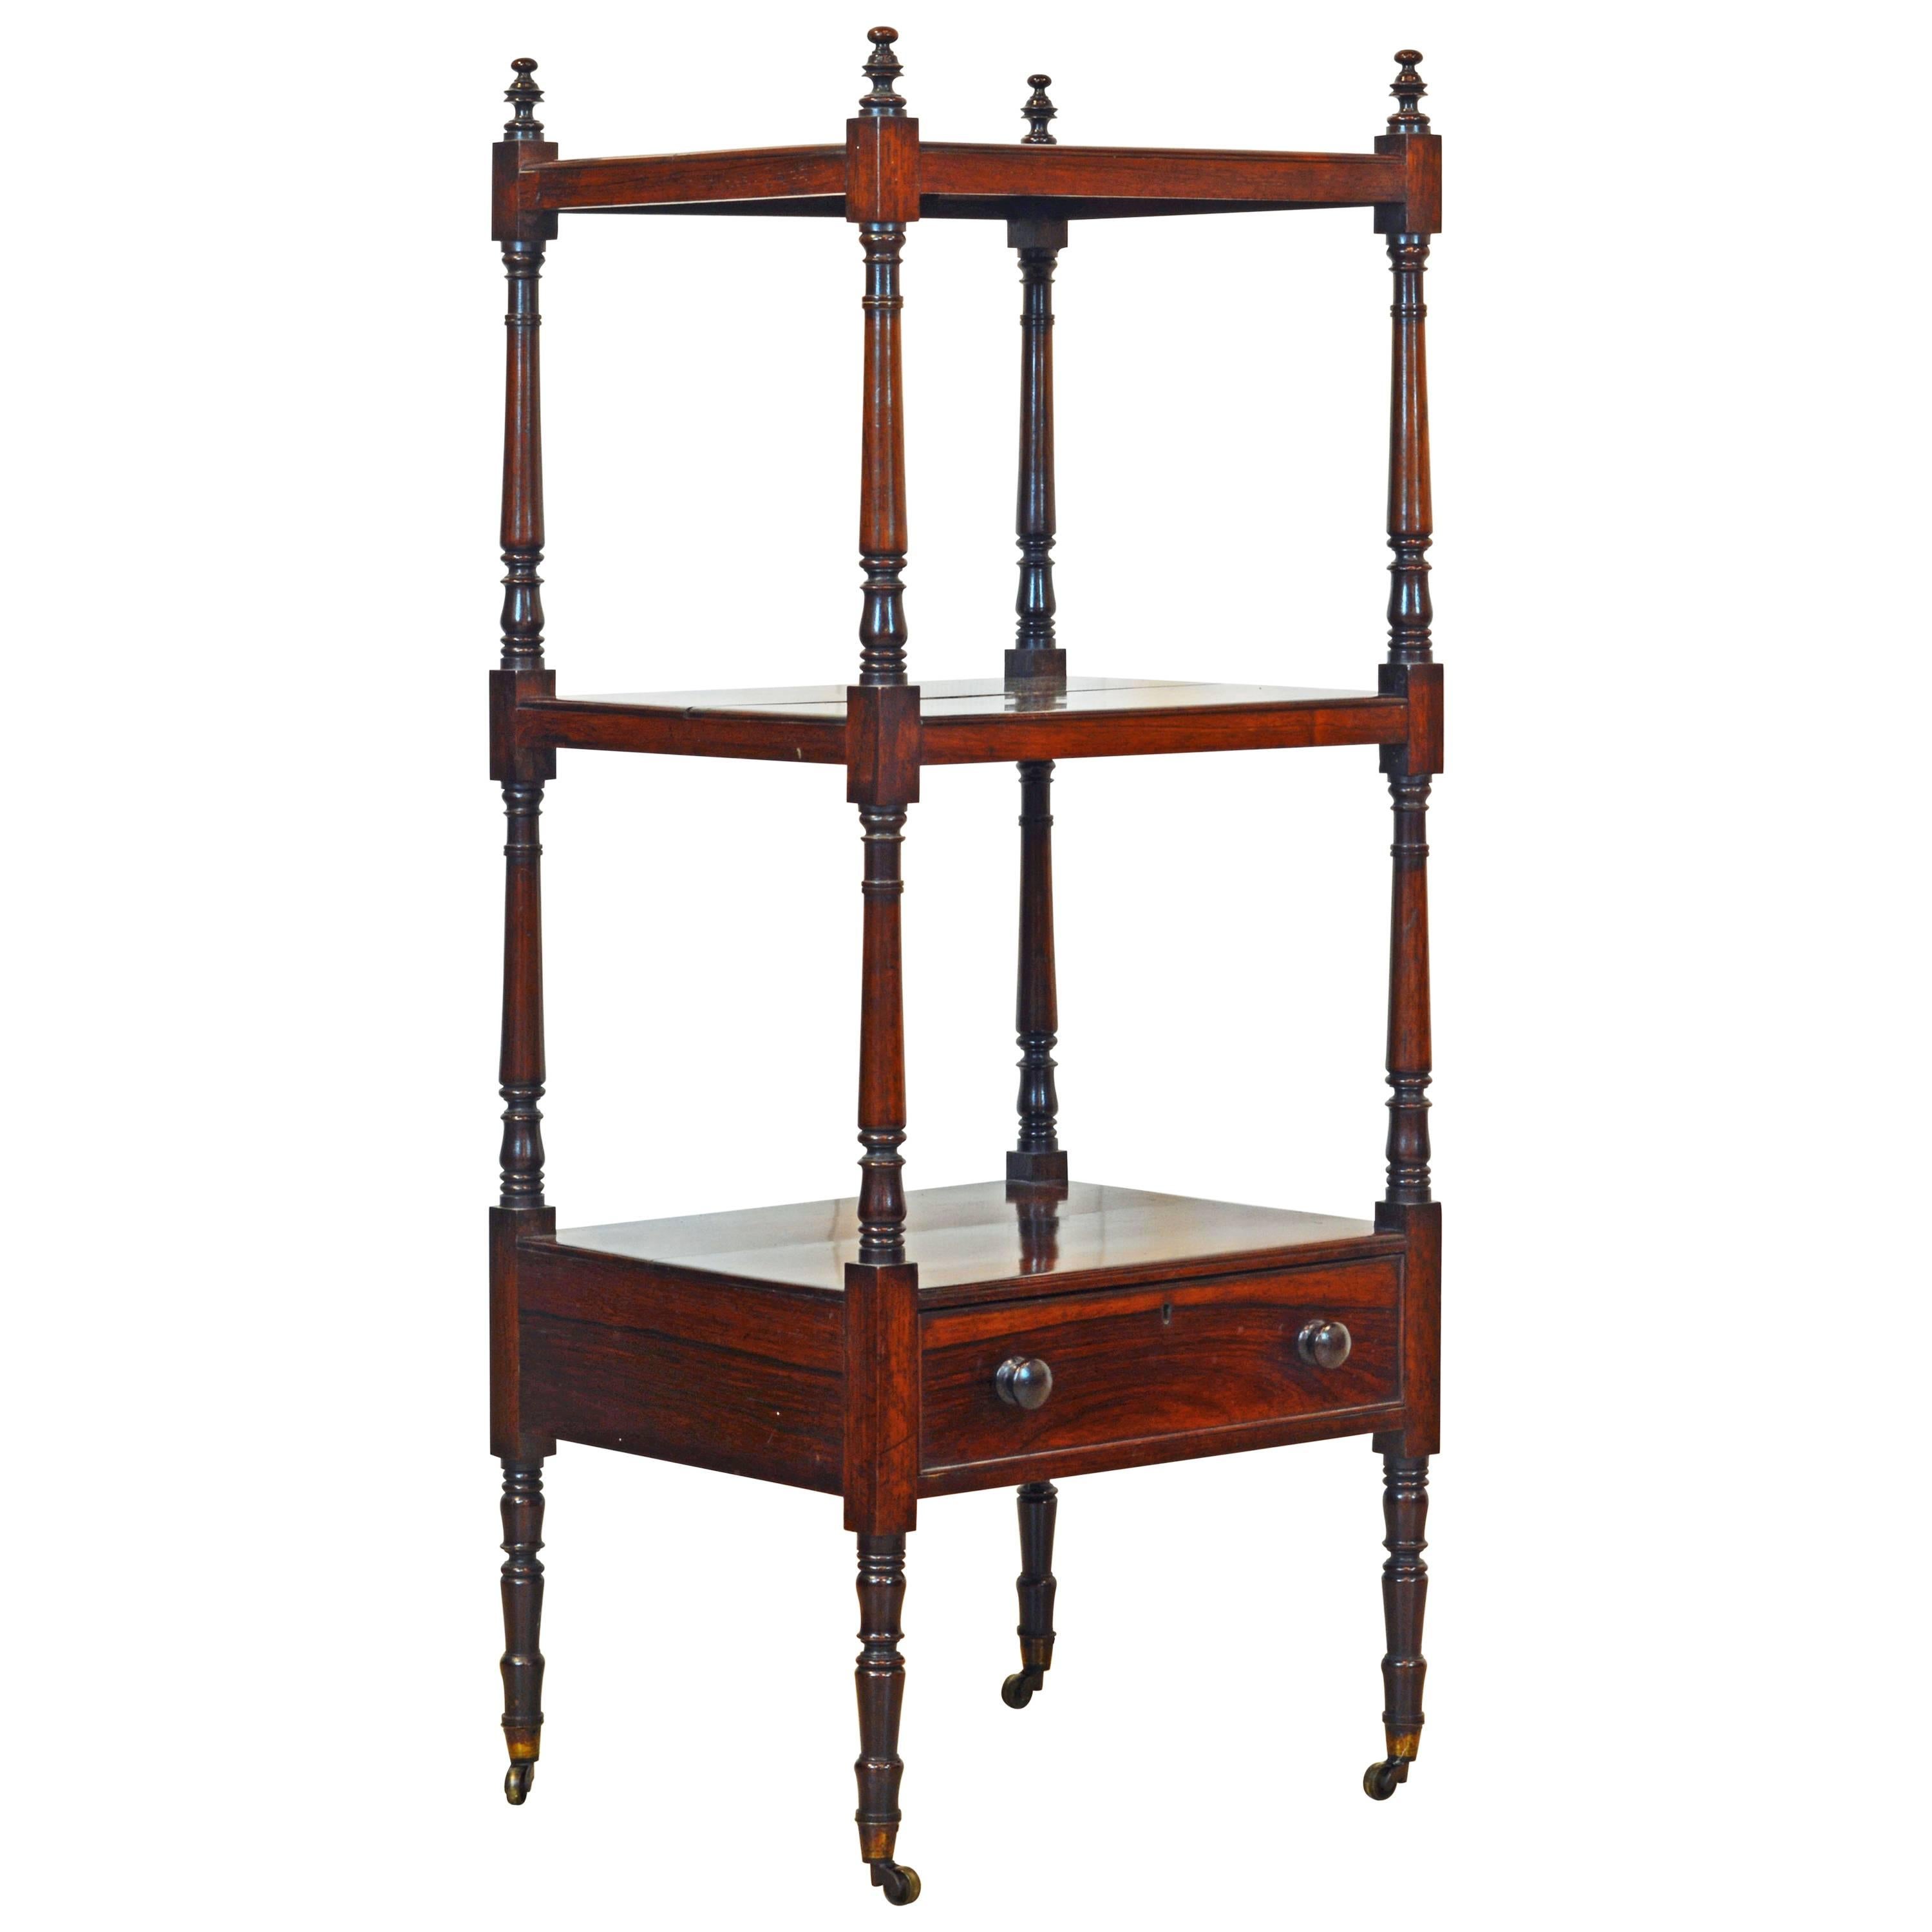 Attractive 19th Century English Rosewood Three-Tier and One Drawer Étagère